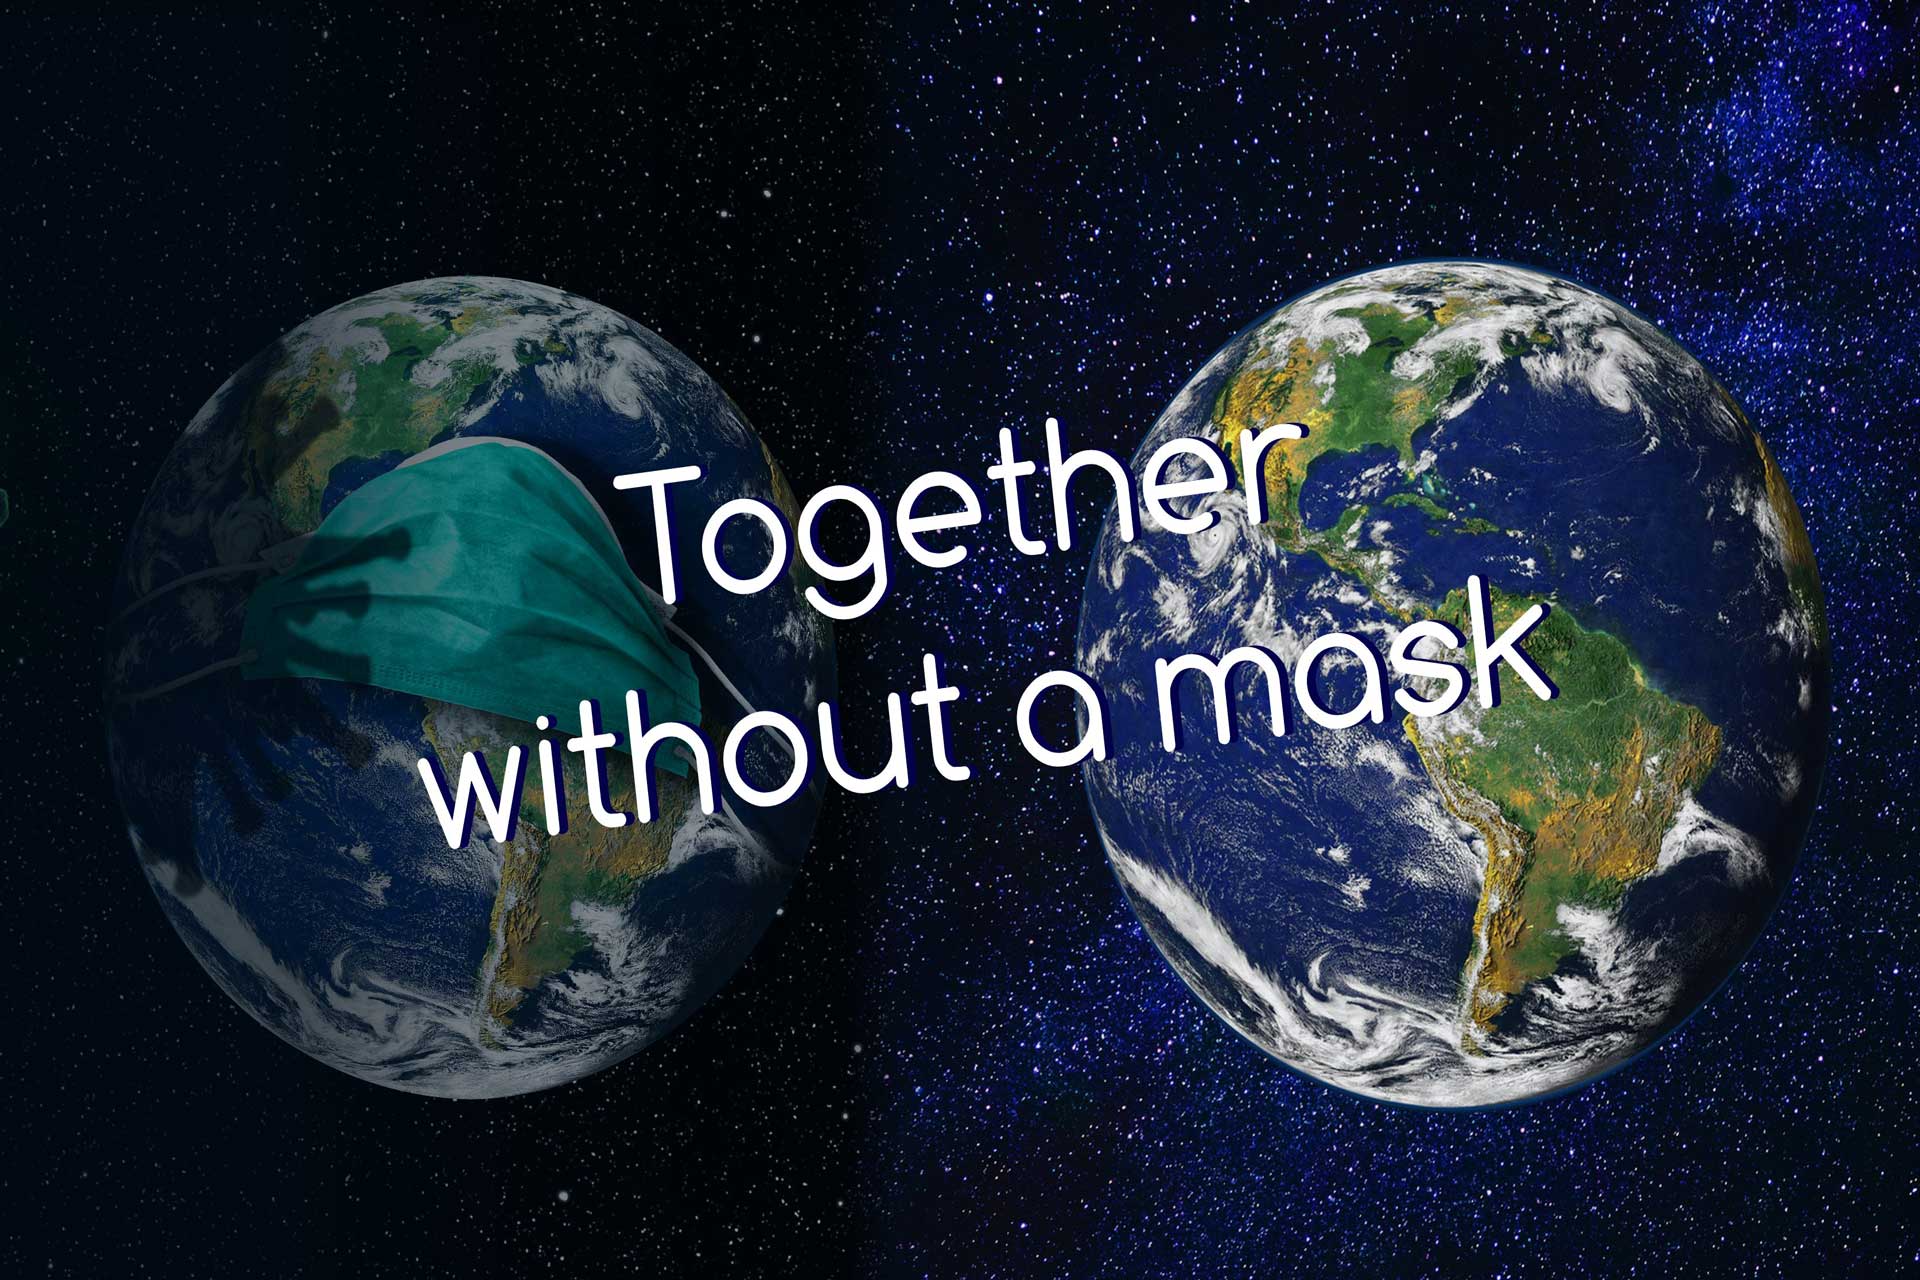 Together without a mask